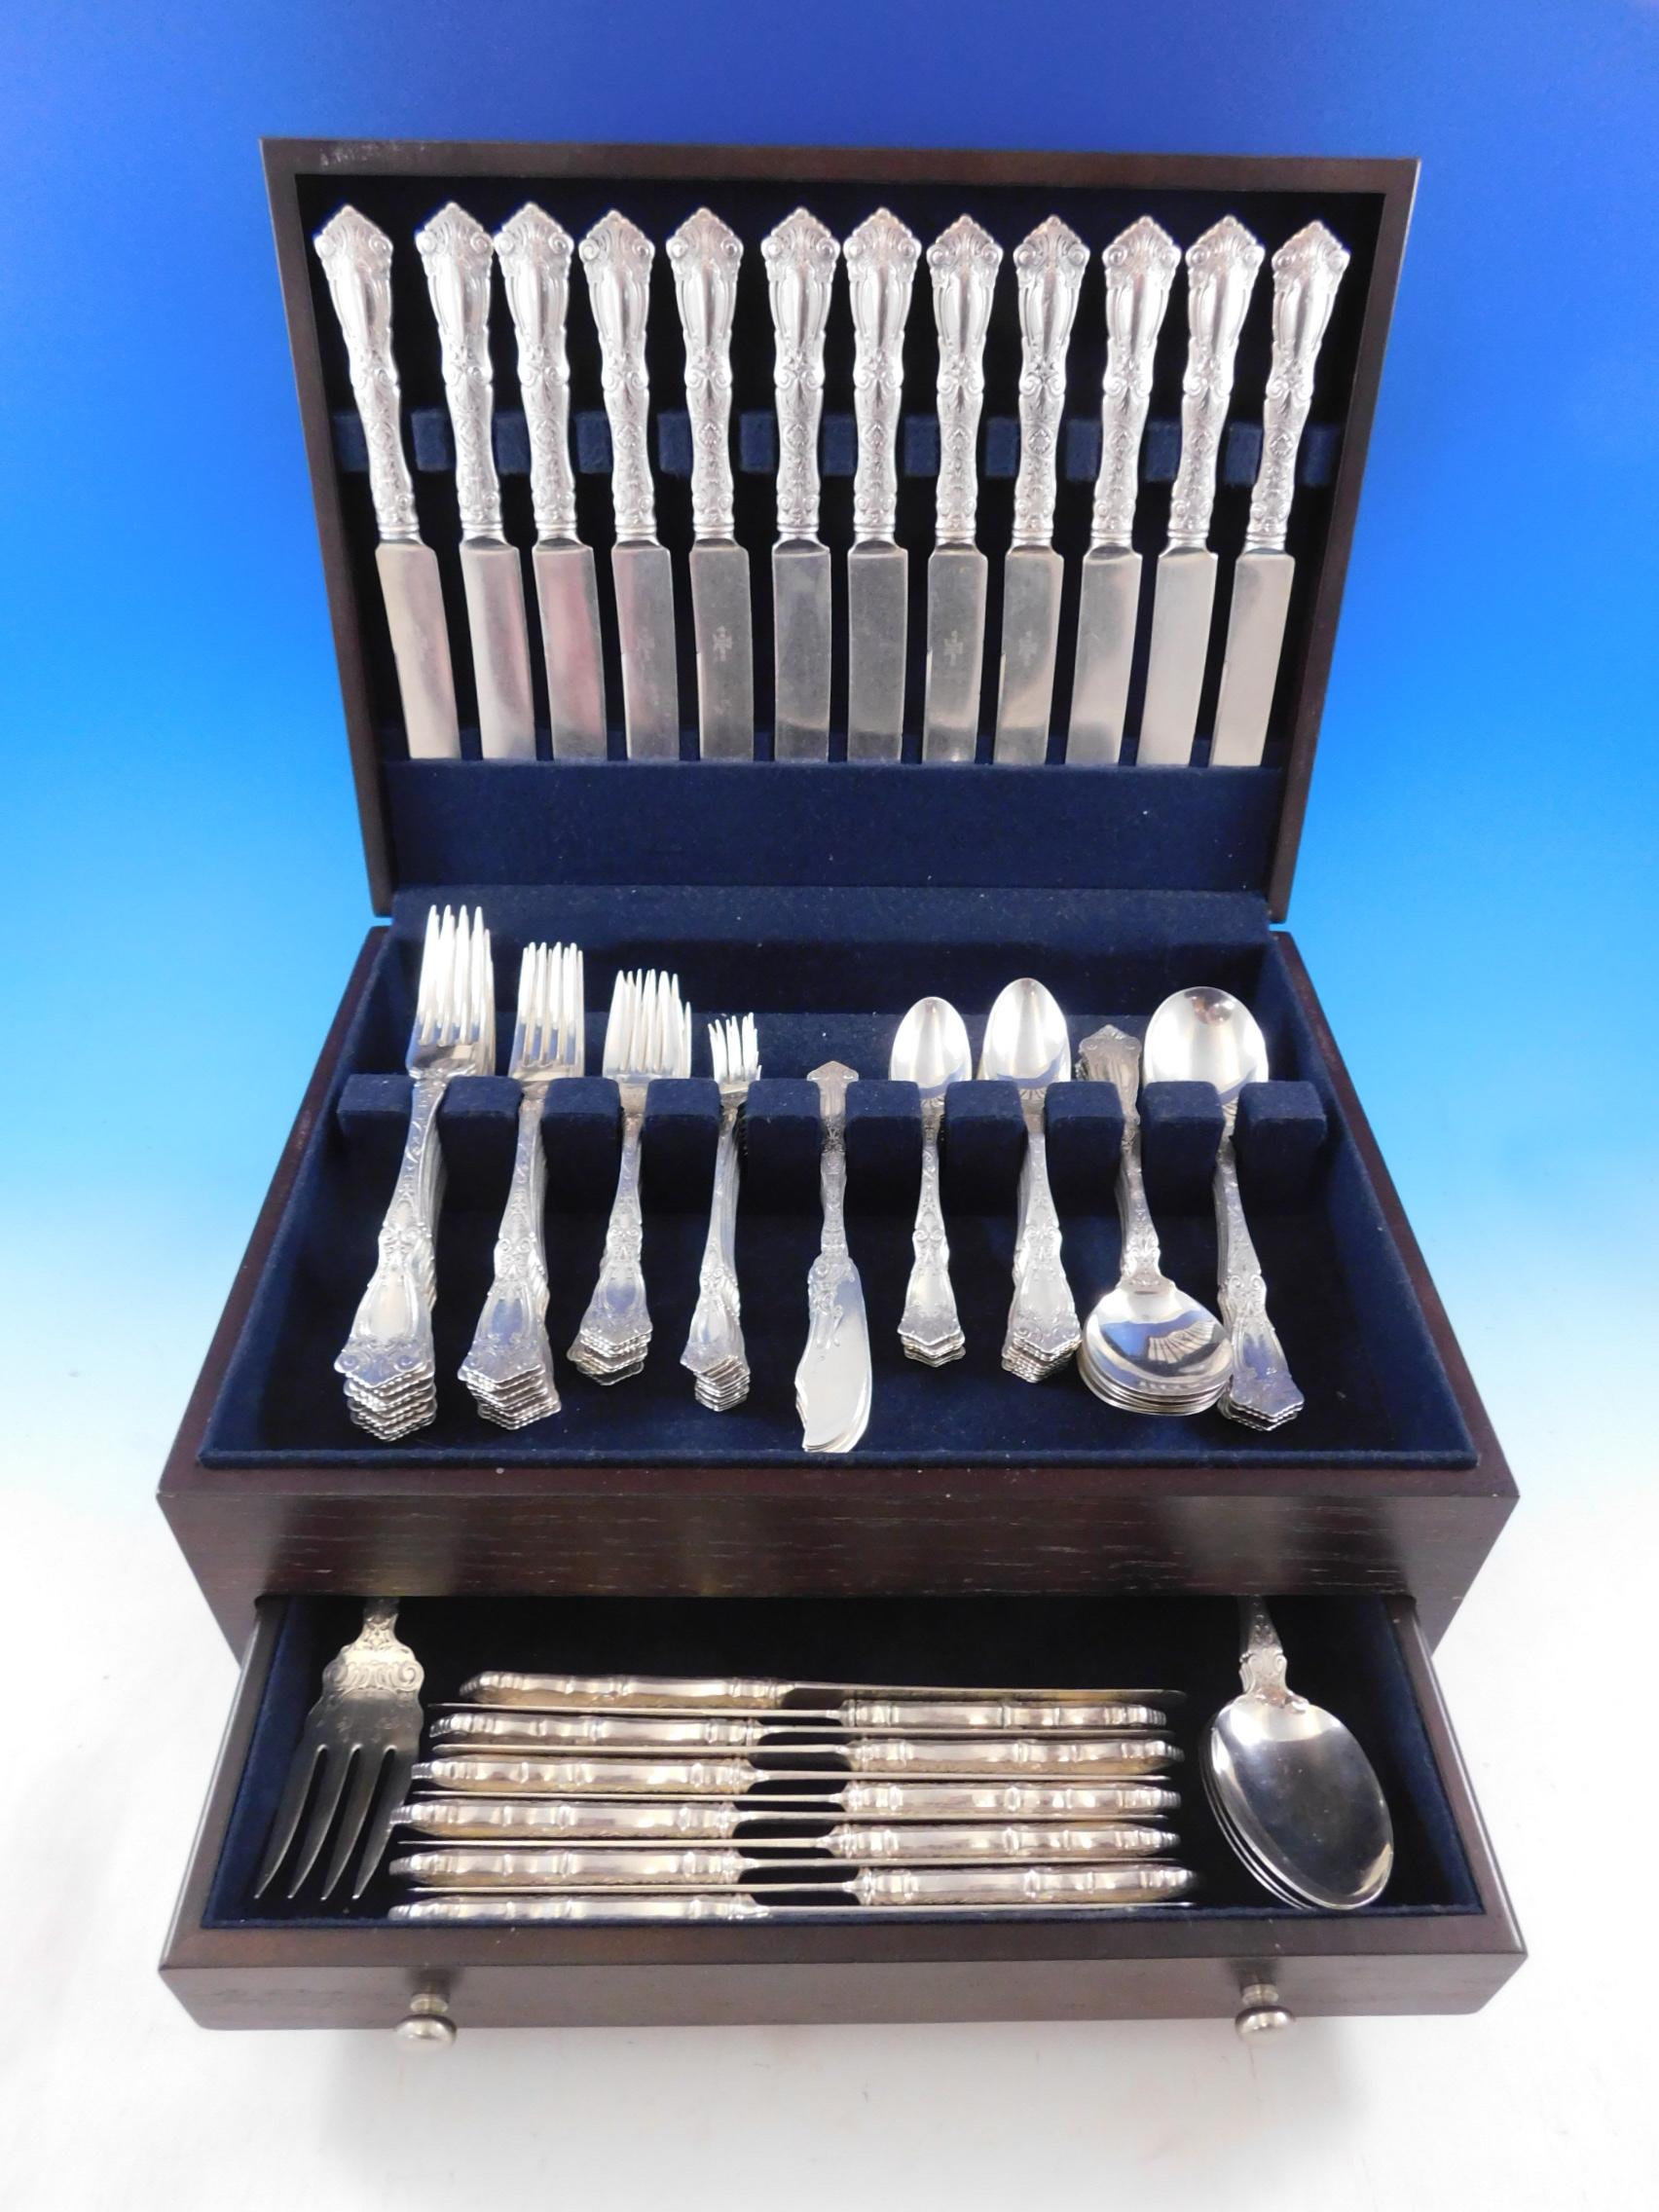 Rare monumental dinner and luncheon size berain by Wallace sterling silver flatware set, 125 pieces. This set includes:

12 dinner size knives, 9 1/2